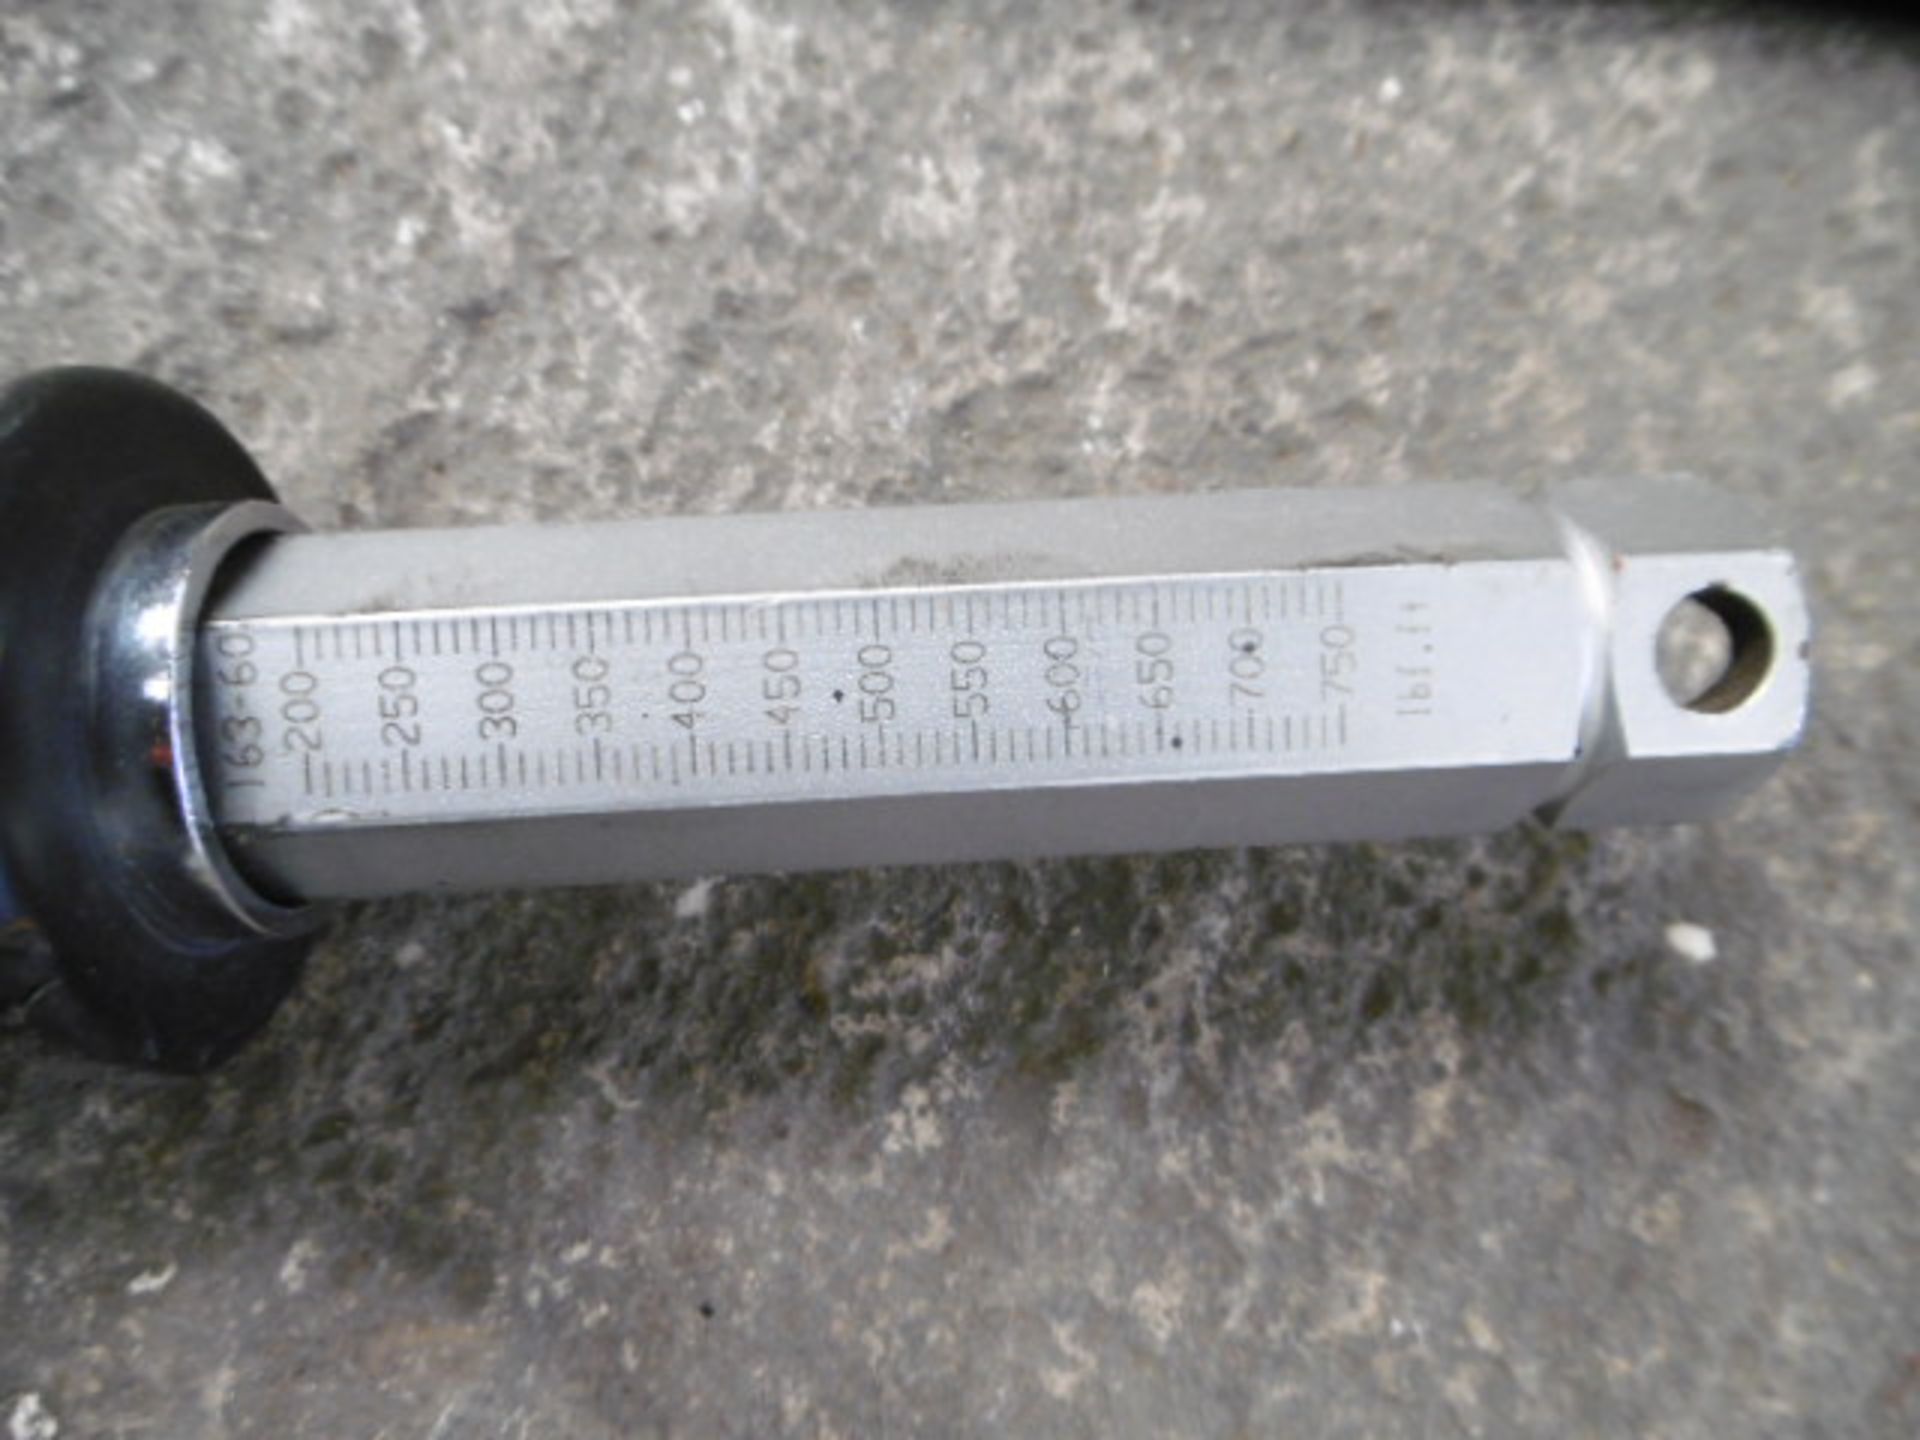 Norbar 5R Torque Wrench - Image 6 of 6